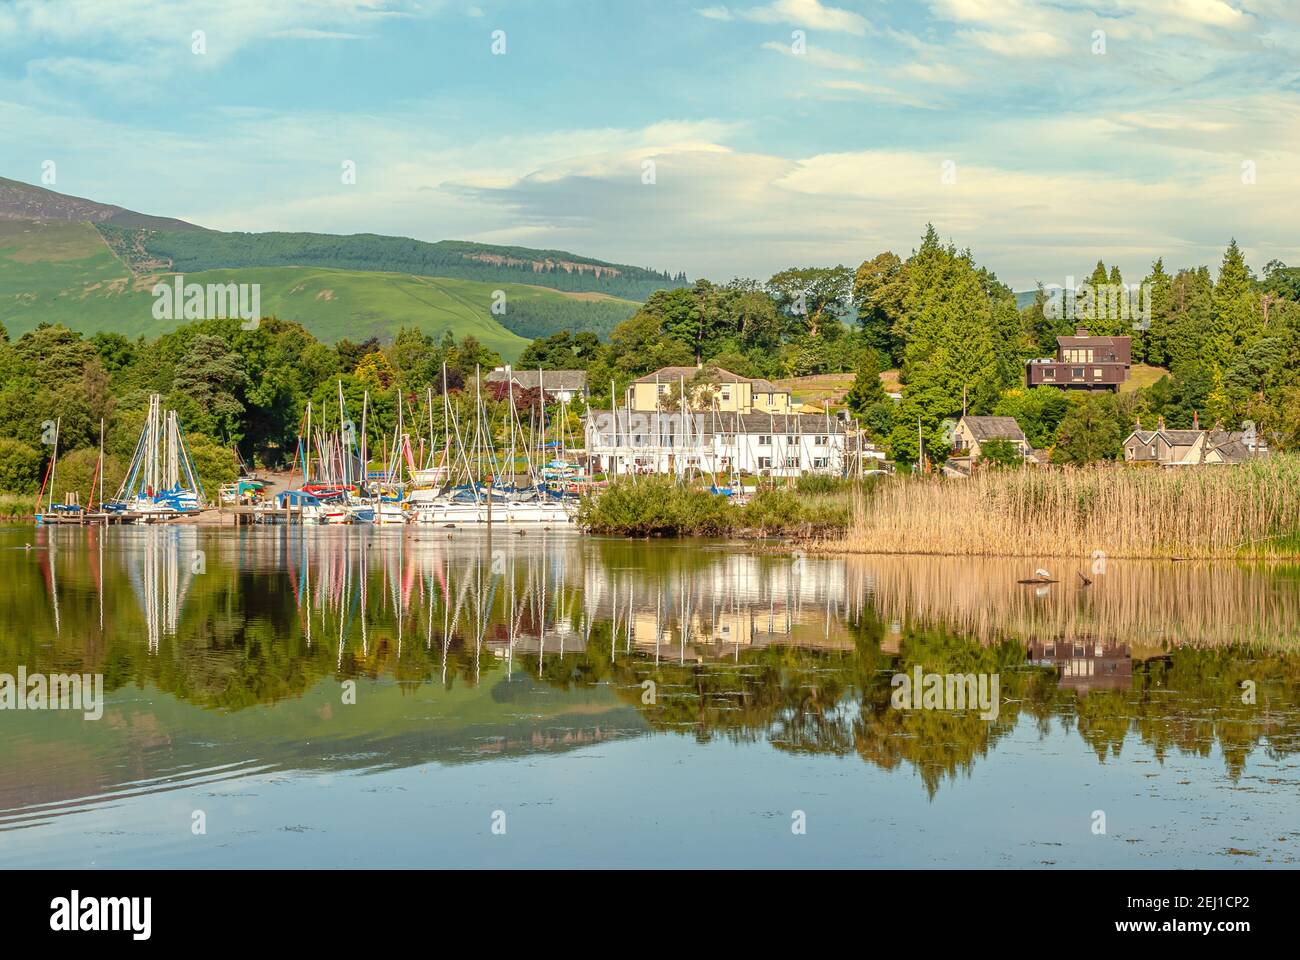 Marina at Derwent Water, one of the main lakes in the Lake District National Park, Cumbria, England Stock Photo